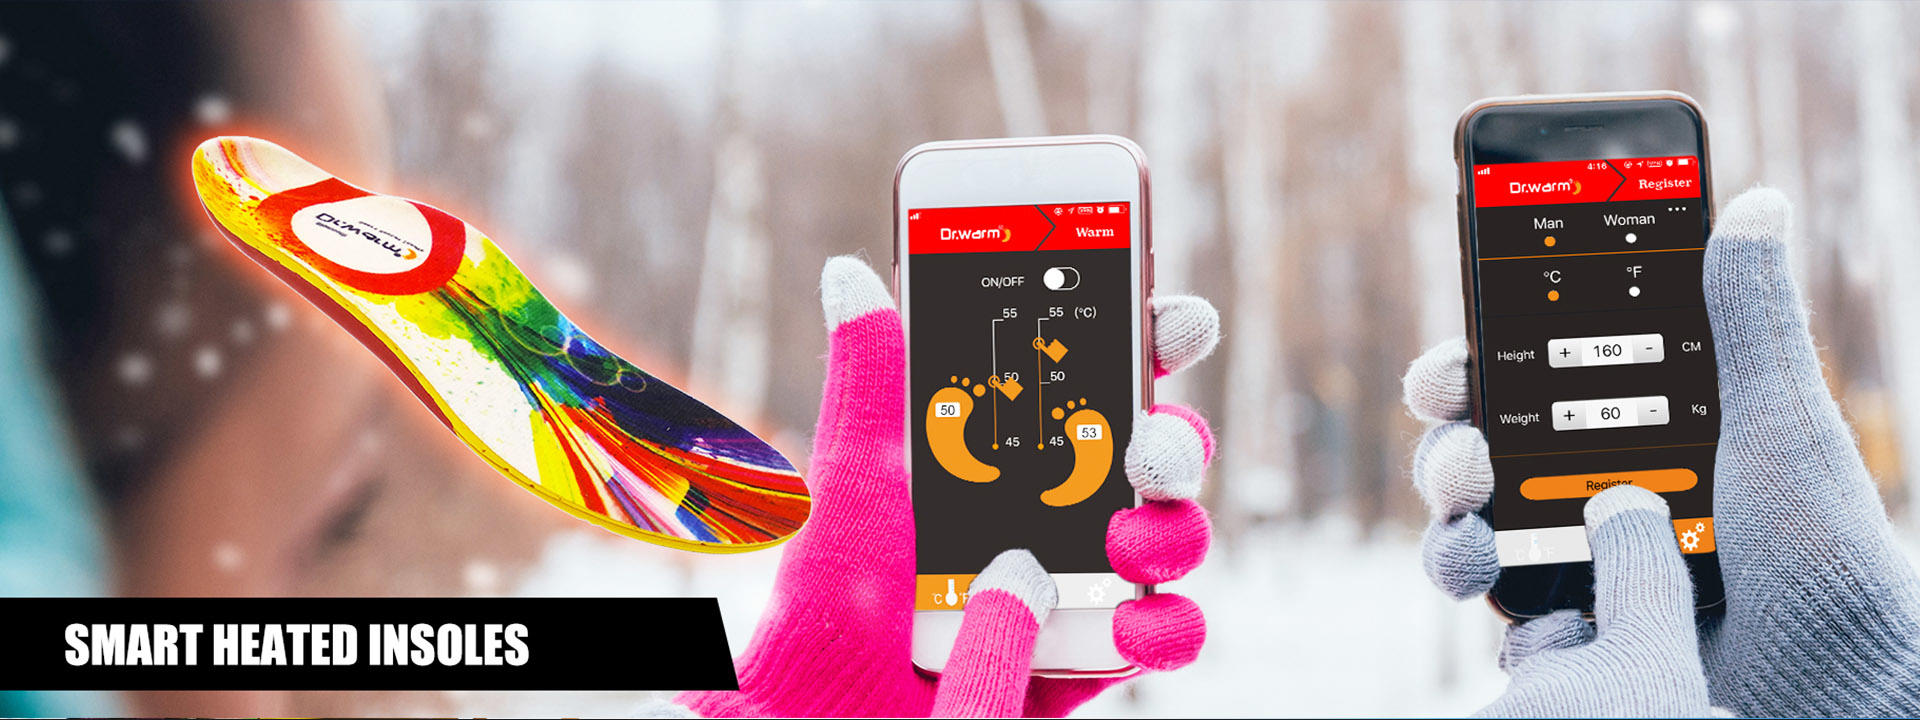 rechargeable heated insoles bluetooth fit to most shoes for winter-3